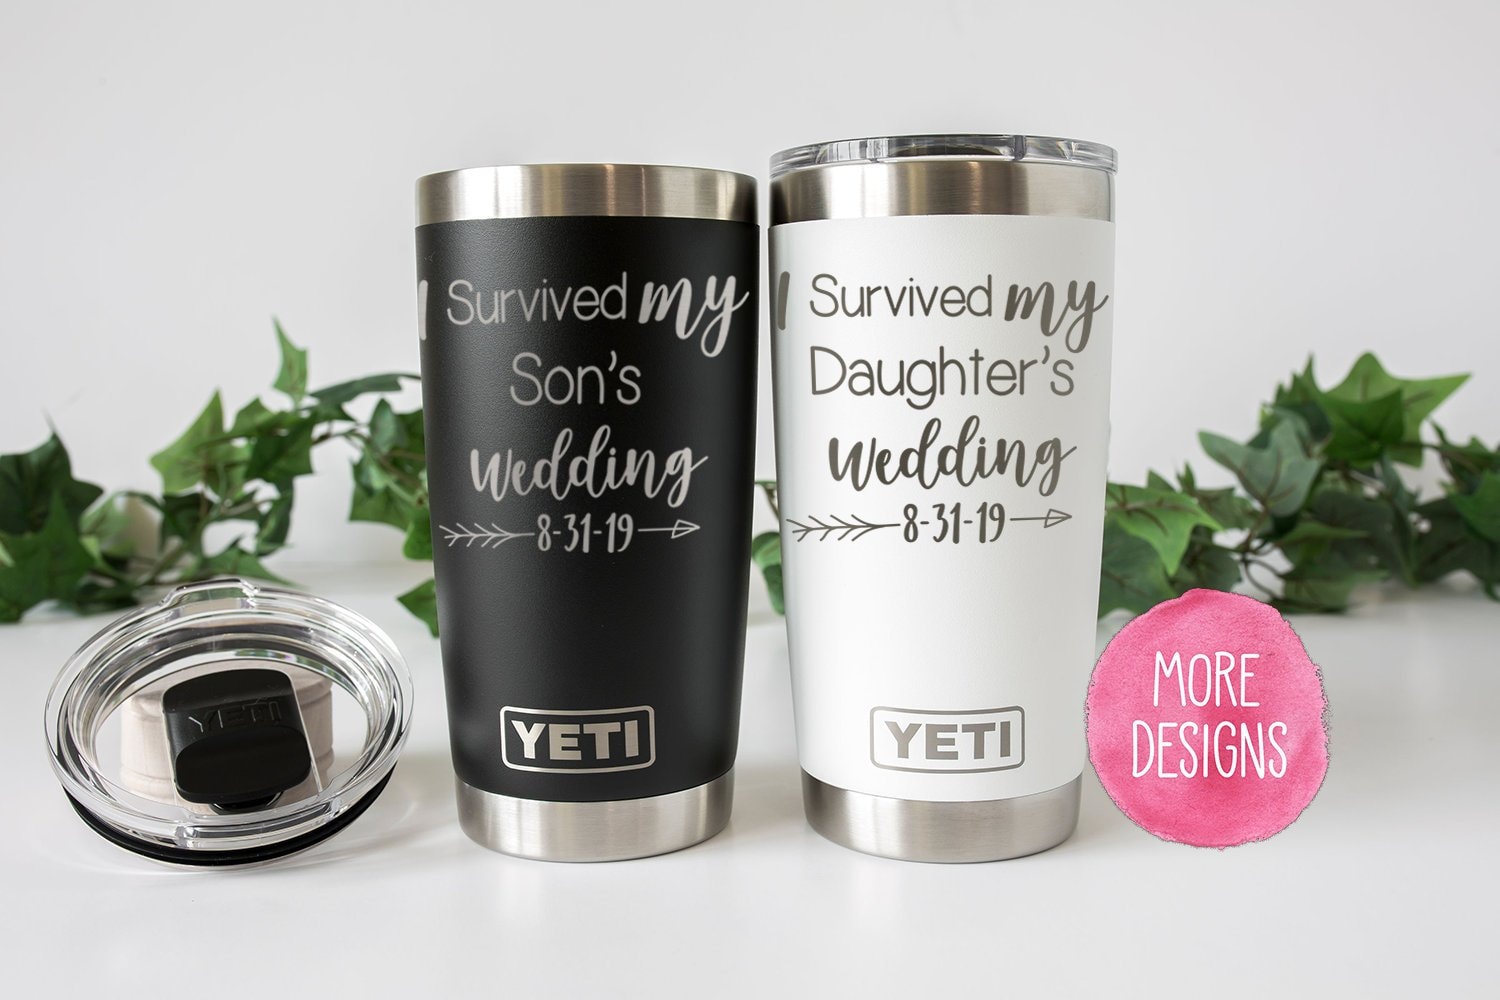 Personalized Engraved YETI® Colster or Polar Camel Can Holder Groomsmen  Gift, Best Man, Wedding Keepsake, Father of the Bride Groom BS1 